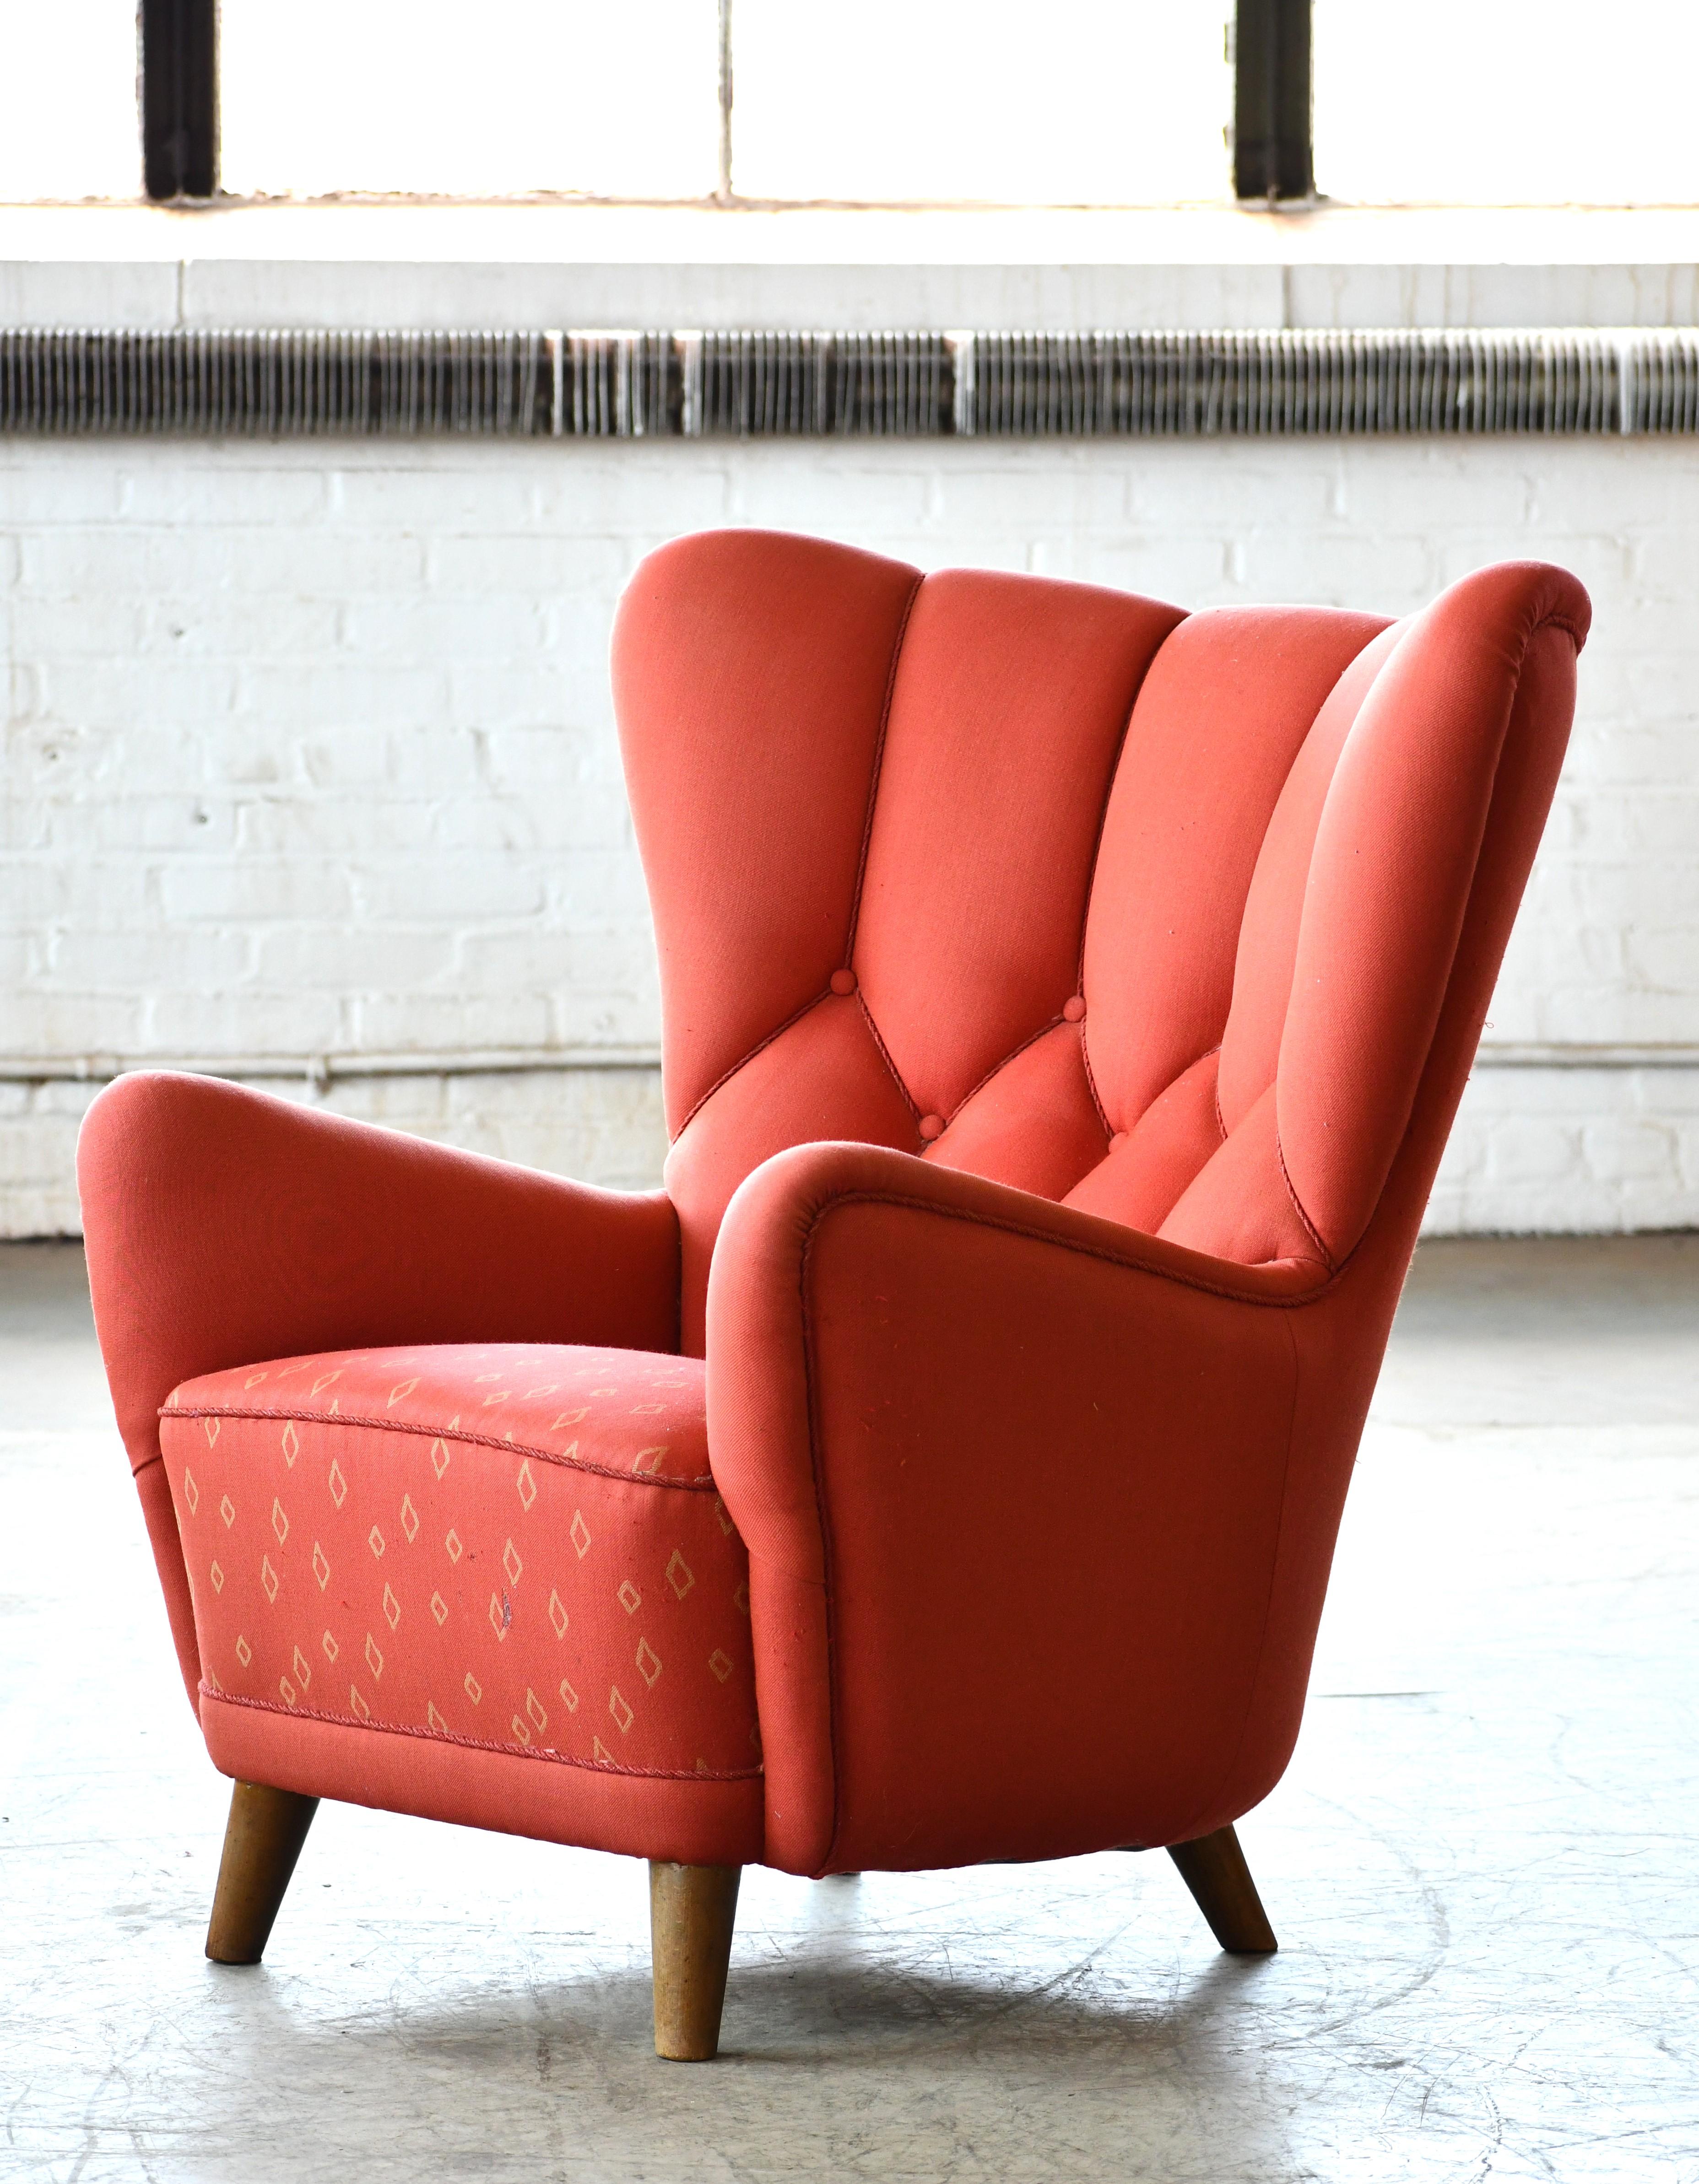 Mid-20th Century Exquisite Danish Lassen Style Mid-Century Lounge Chair in Red Wool, 1940's For Sale